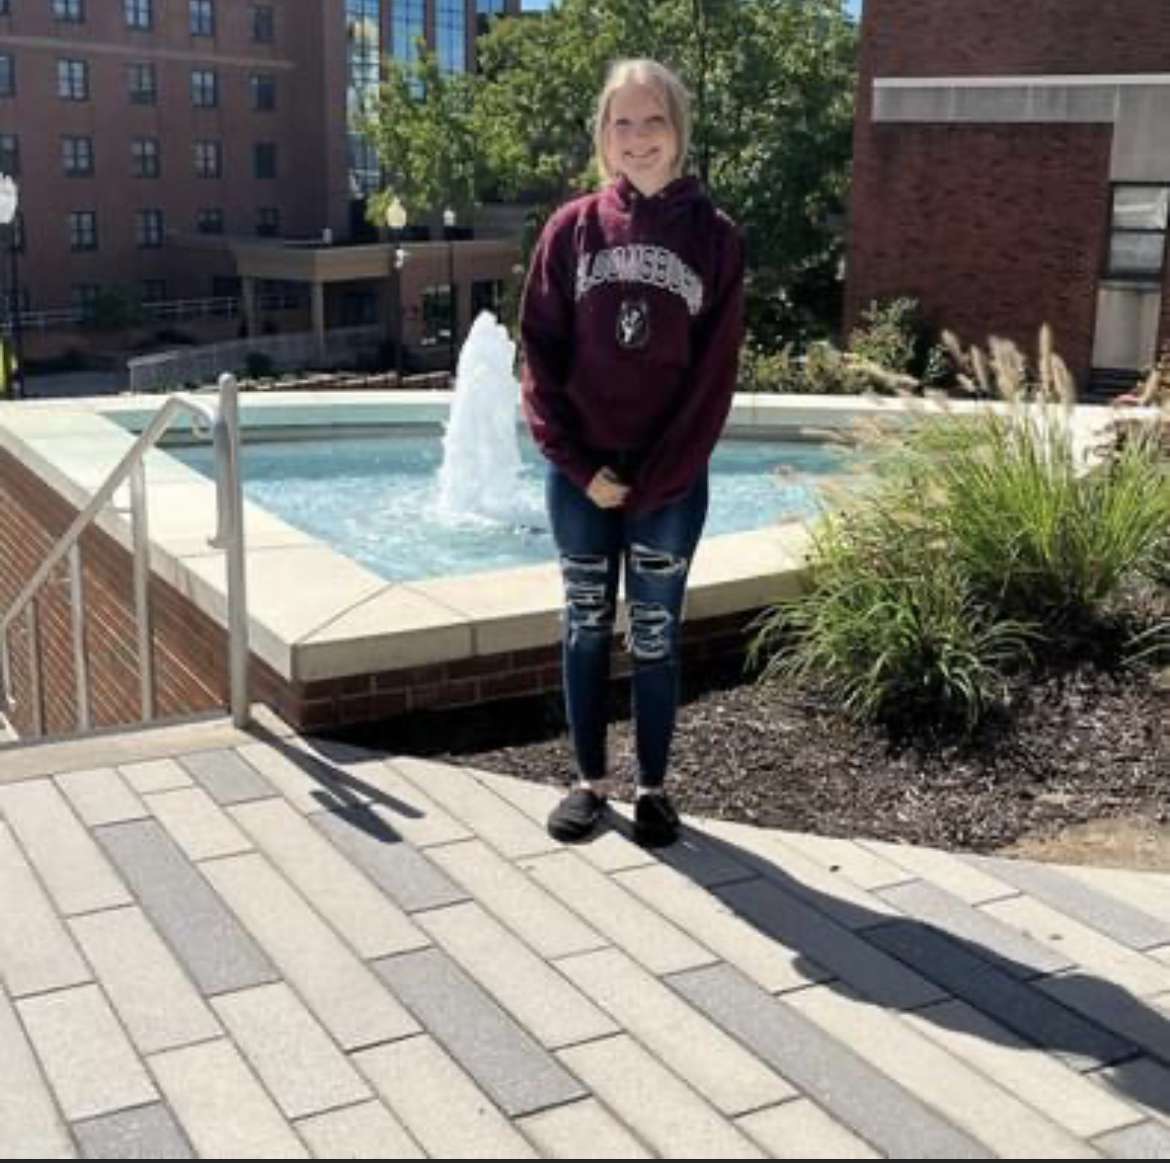 Alayna Philips tours Bloomsburg with her mother on a day off from school.